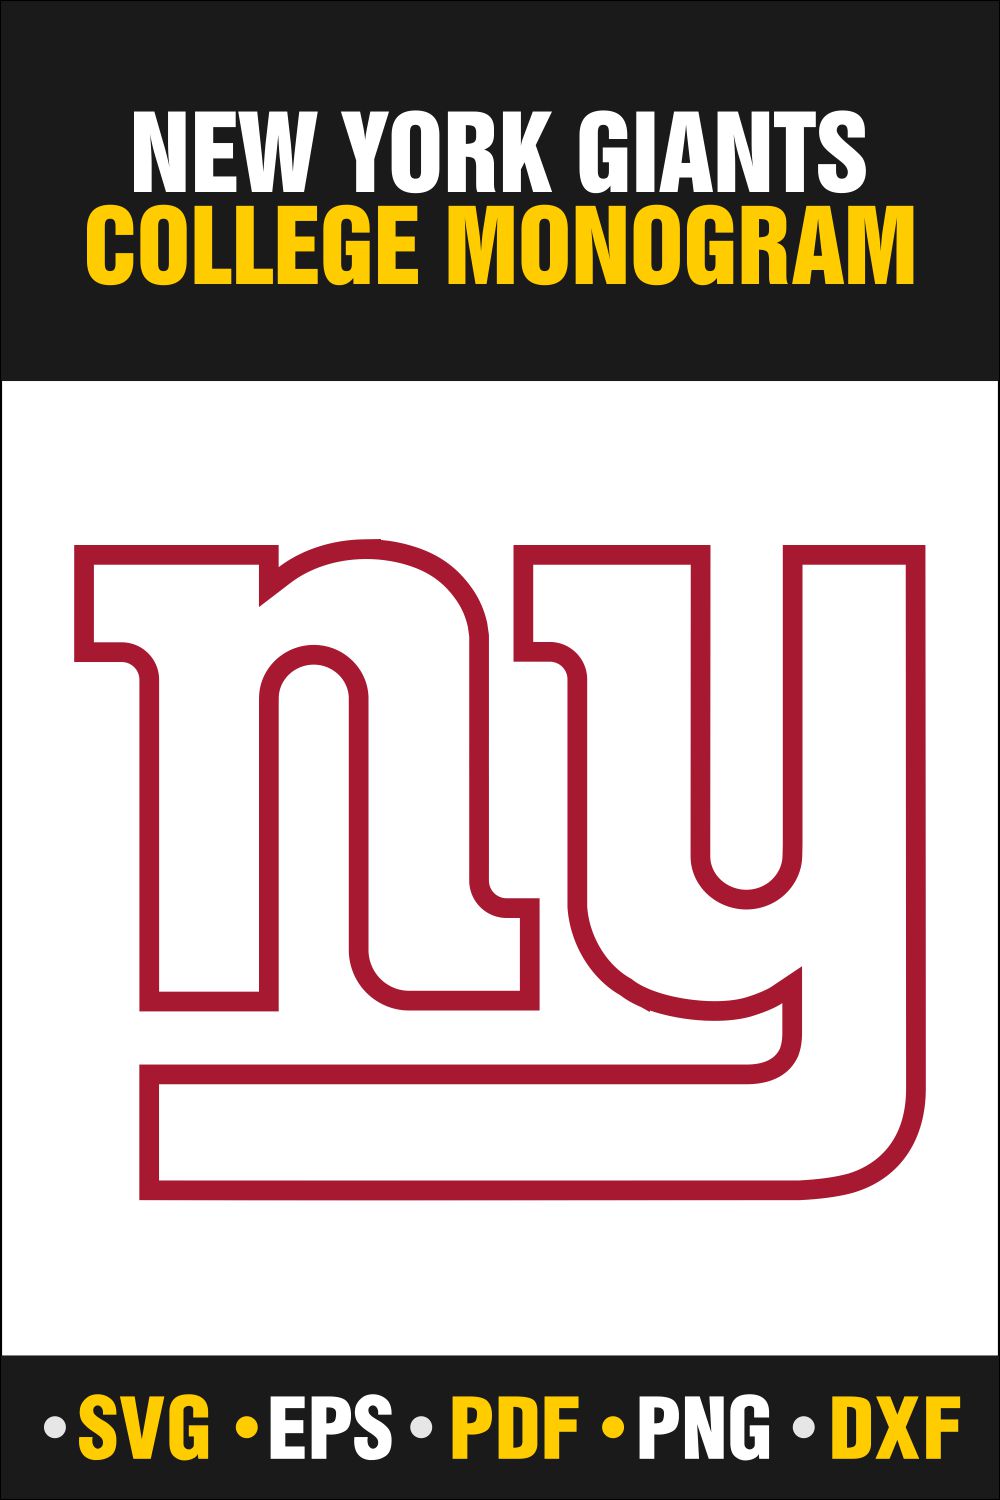 New York Giants SVG, PDF, PNG, DXF, EPS - Only $2 pinterest preview image.